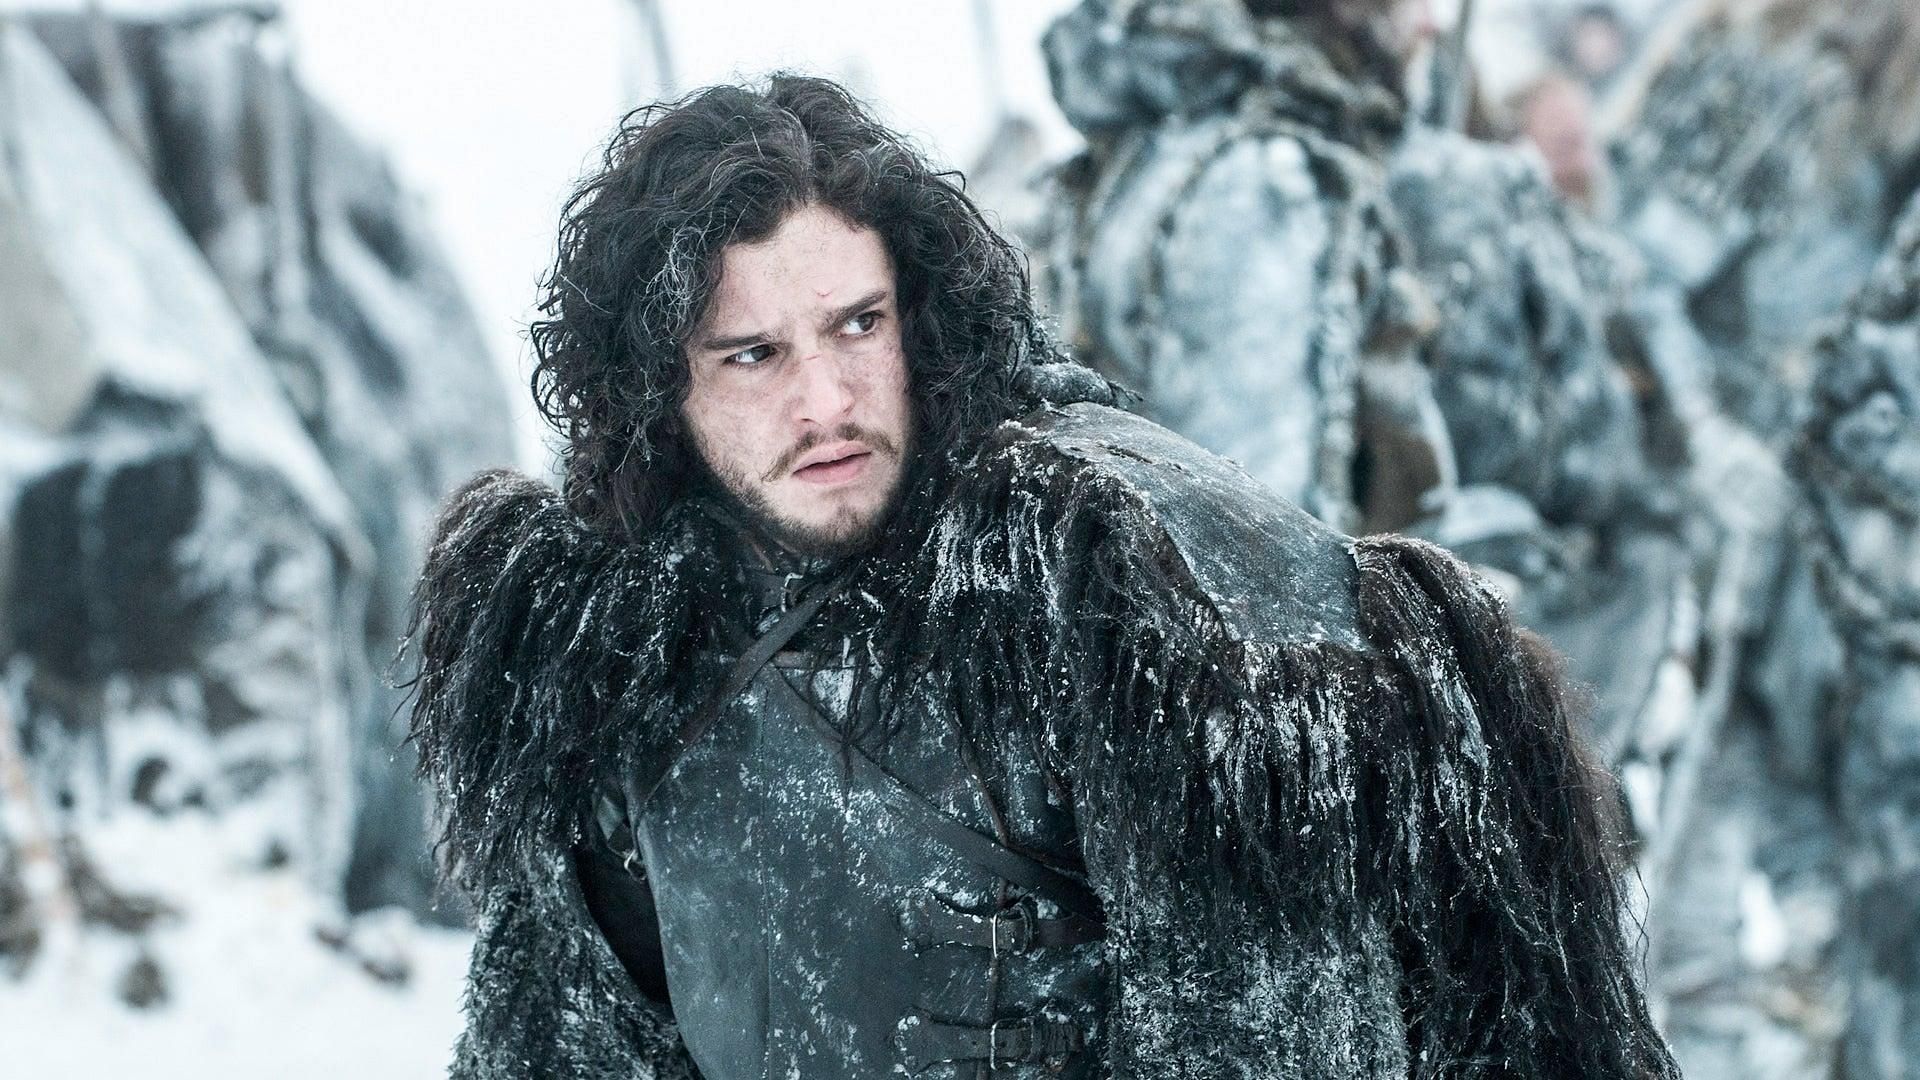 Game of Thrones: What was Jon Snow